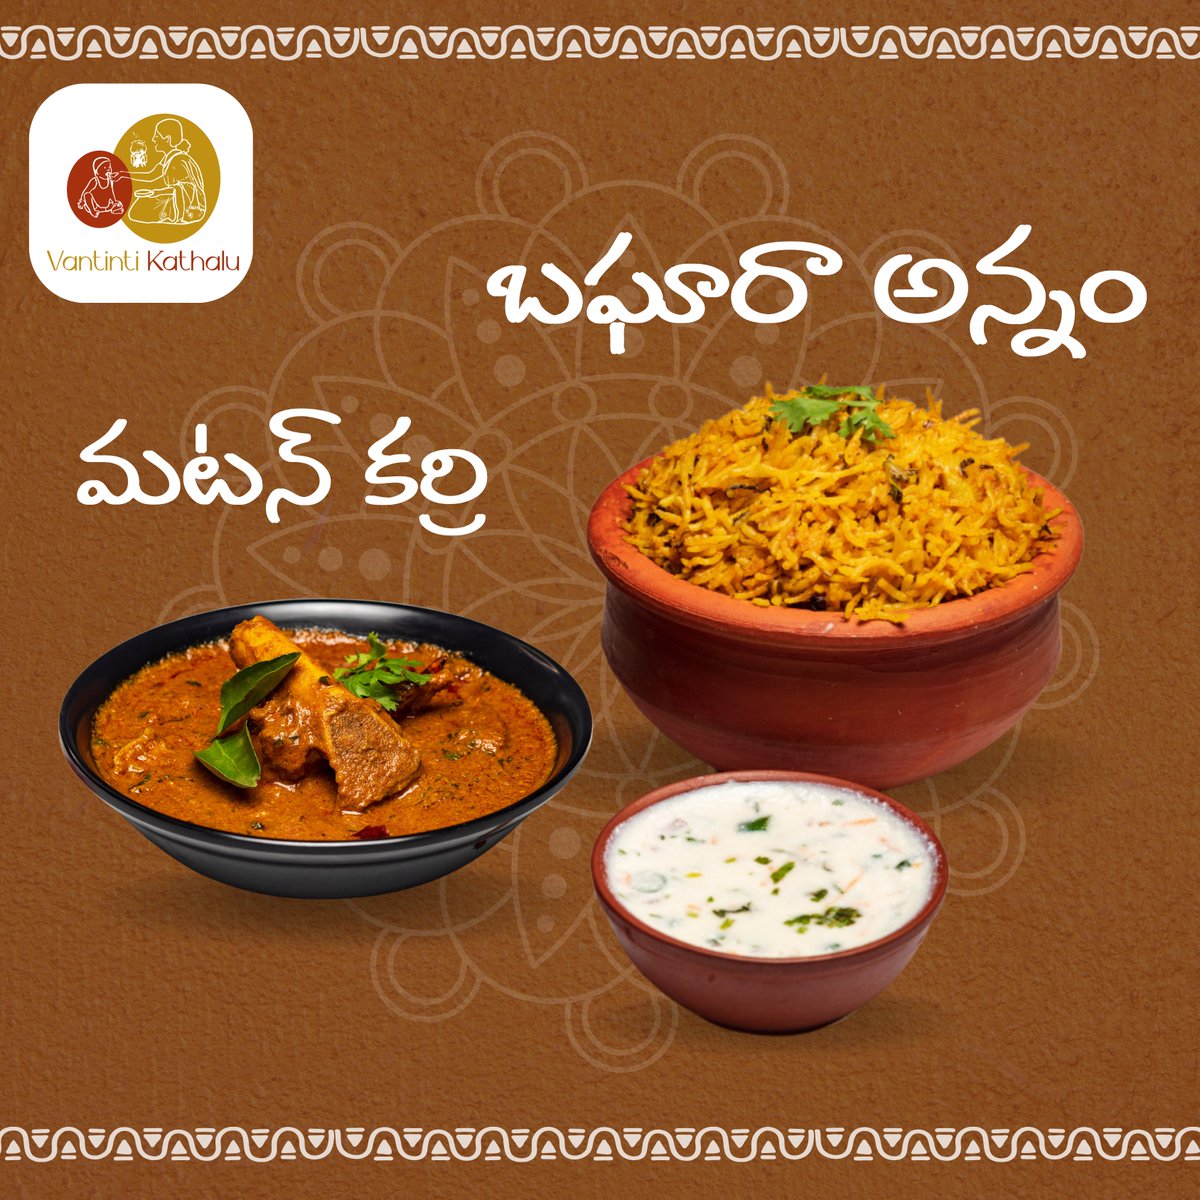 🍛 A Plate of Baghara Rice and Mutton Curry Awaits You at Vantinti Kathalu! 🍖🍚

Indulge in the rich flavors of our Baghara Rice and delectable Mutton Curry.

 Don't miss out on this delightful treat! 😋👌

#VantintiKathalu #BagharaRice #MuttonCurry #HyderabadiCuisine